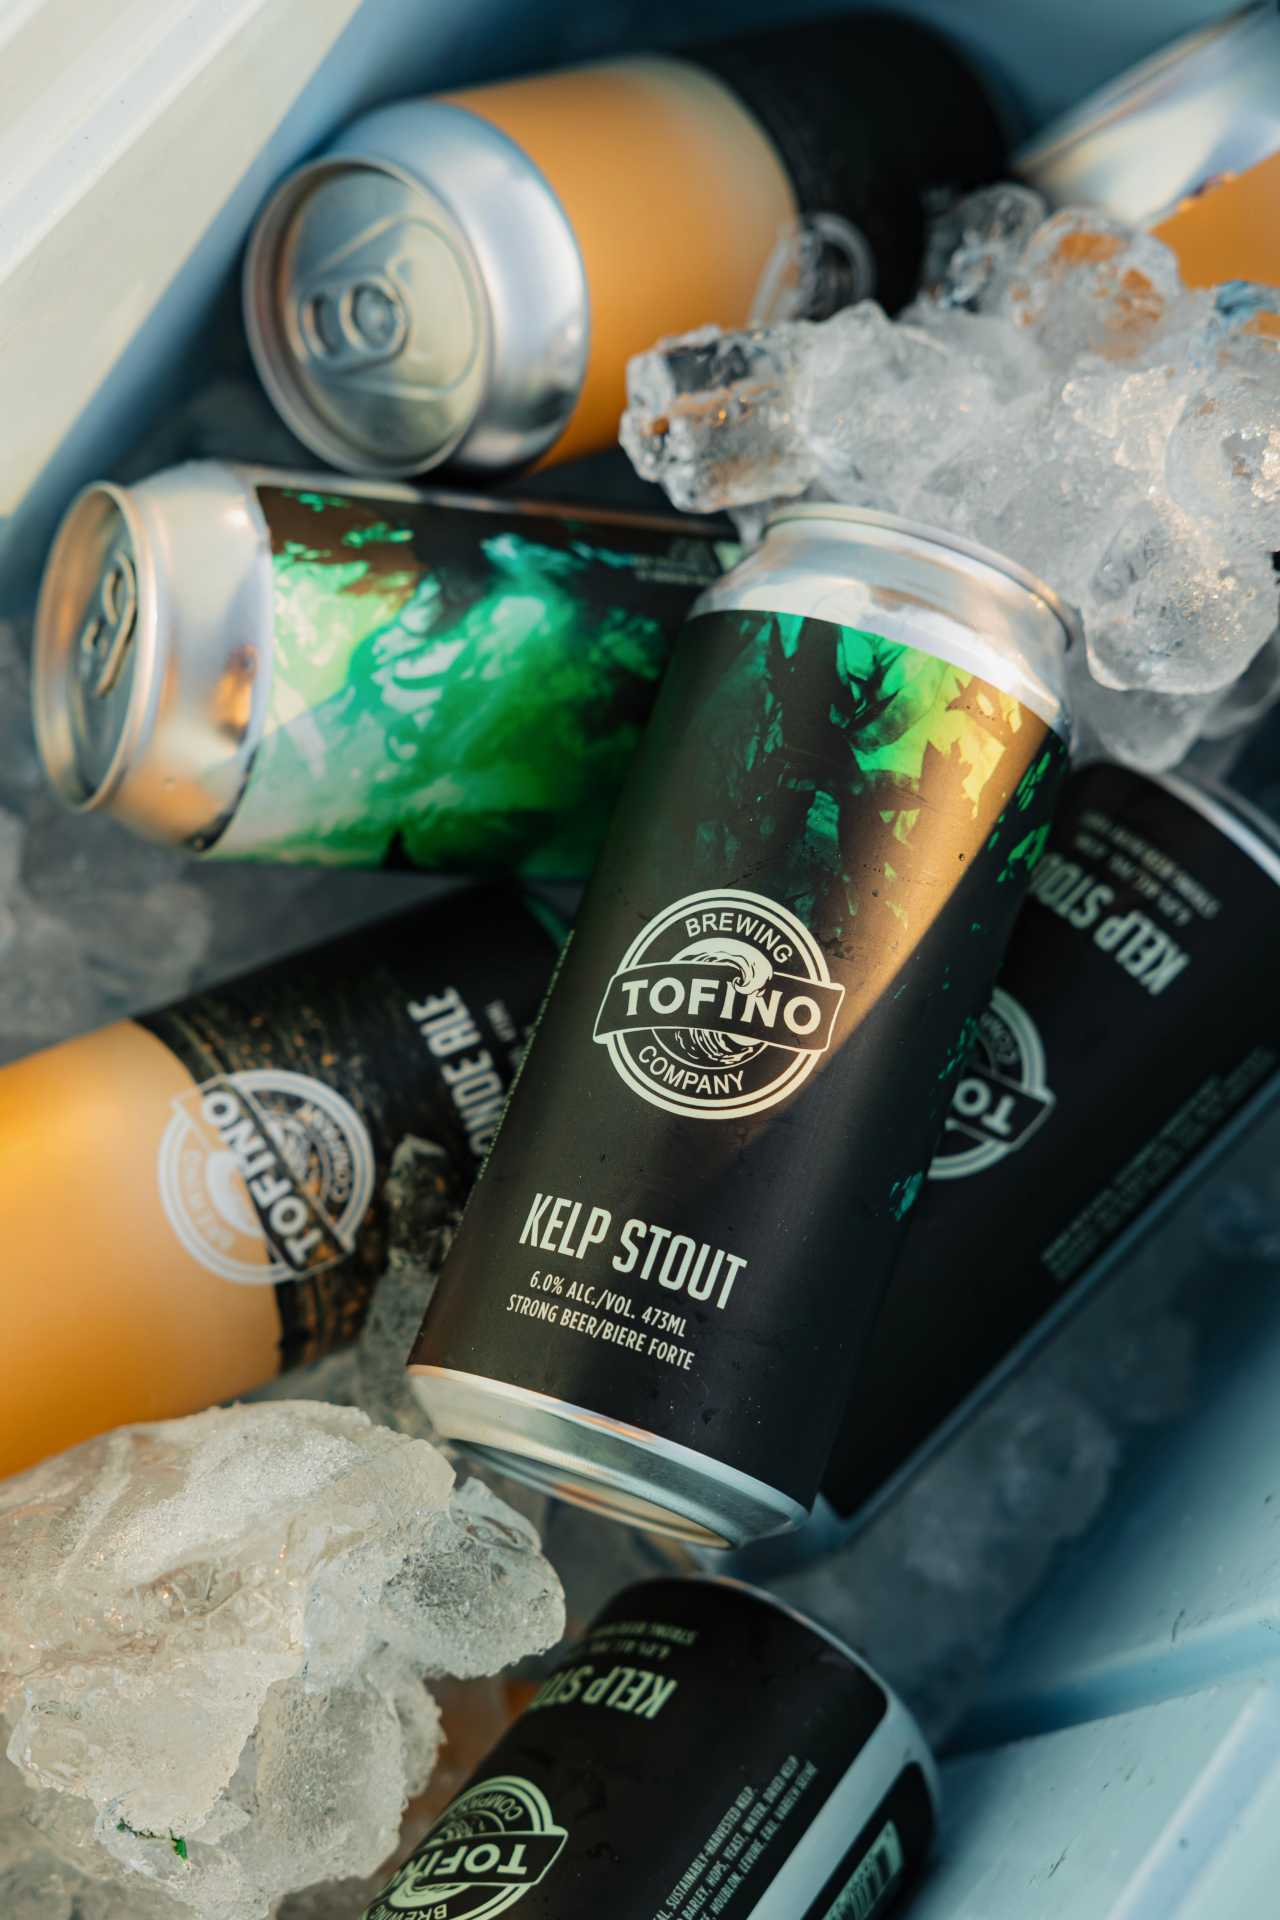 Seaweed benefits | Cans of Tofino Brewing Co.’s Kelp Stout